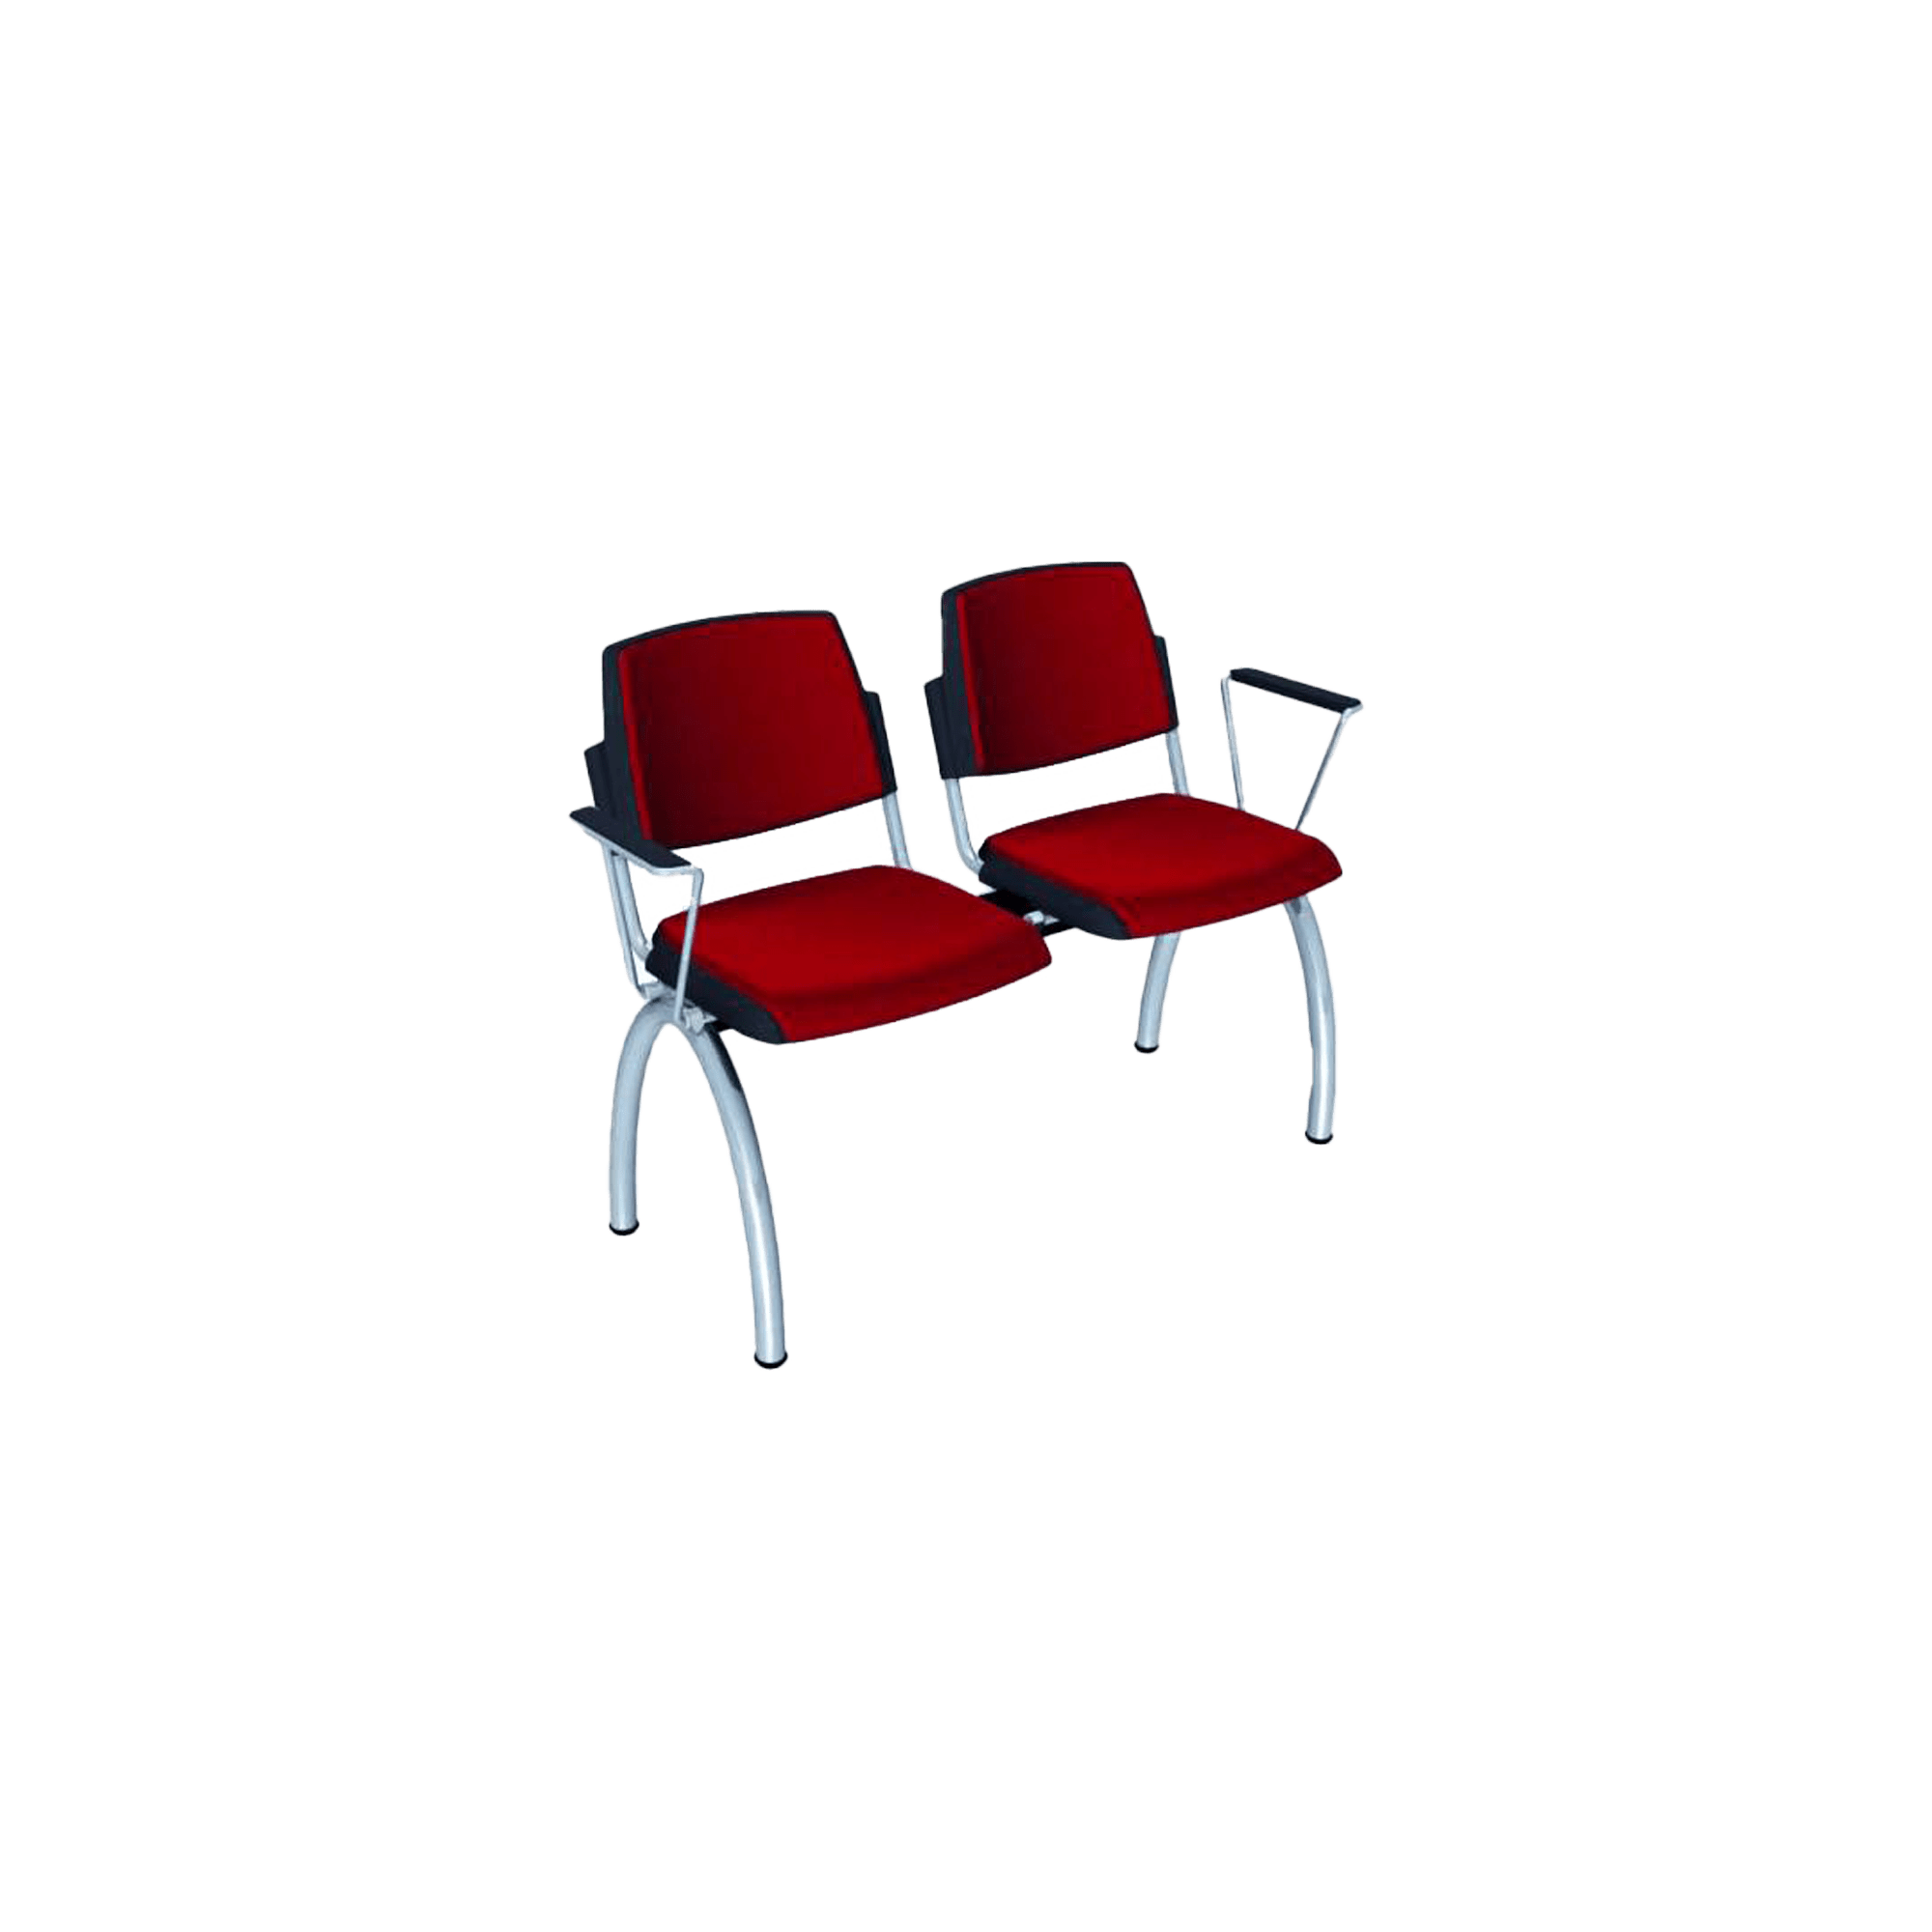 two red chairs